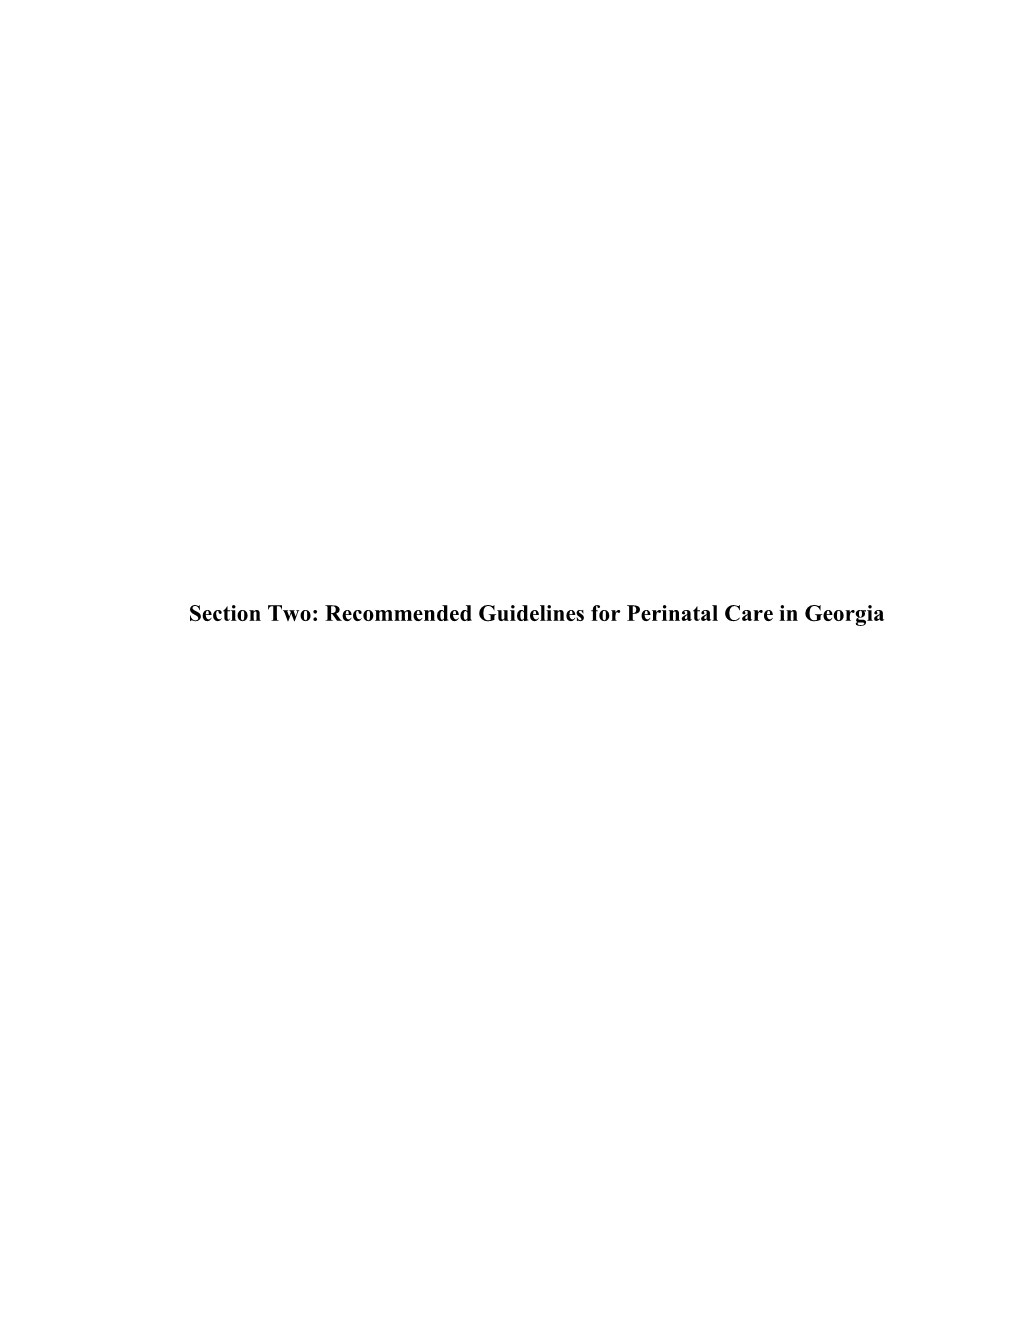 Recommended Guidelines for Perinatal Care in Georgia